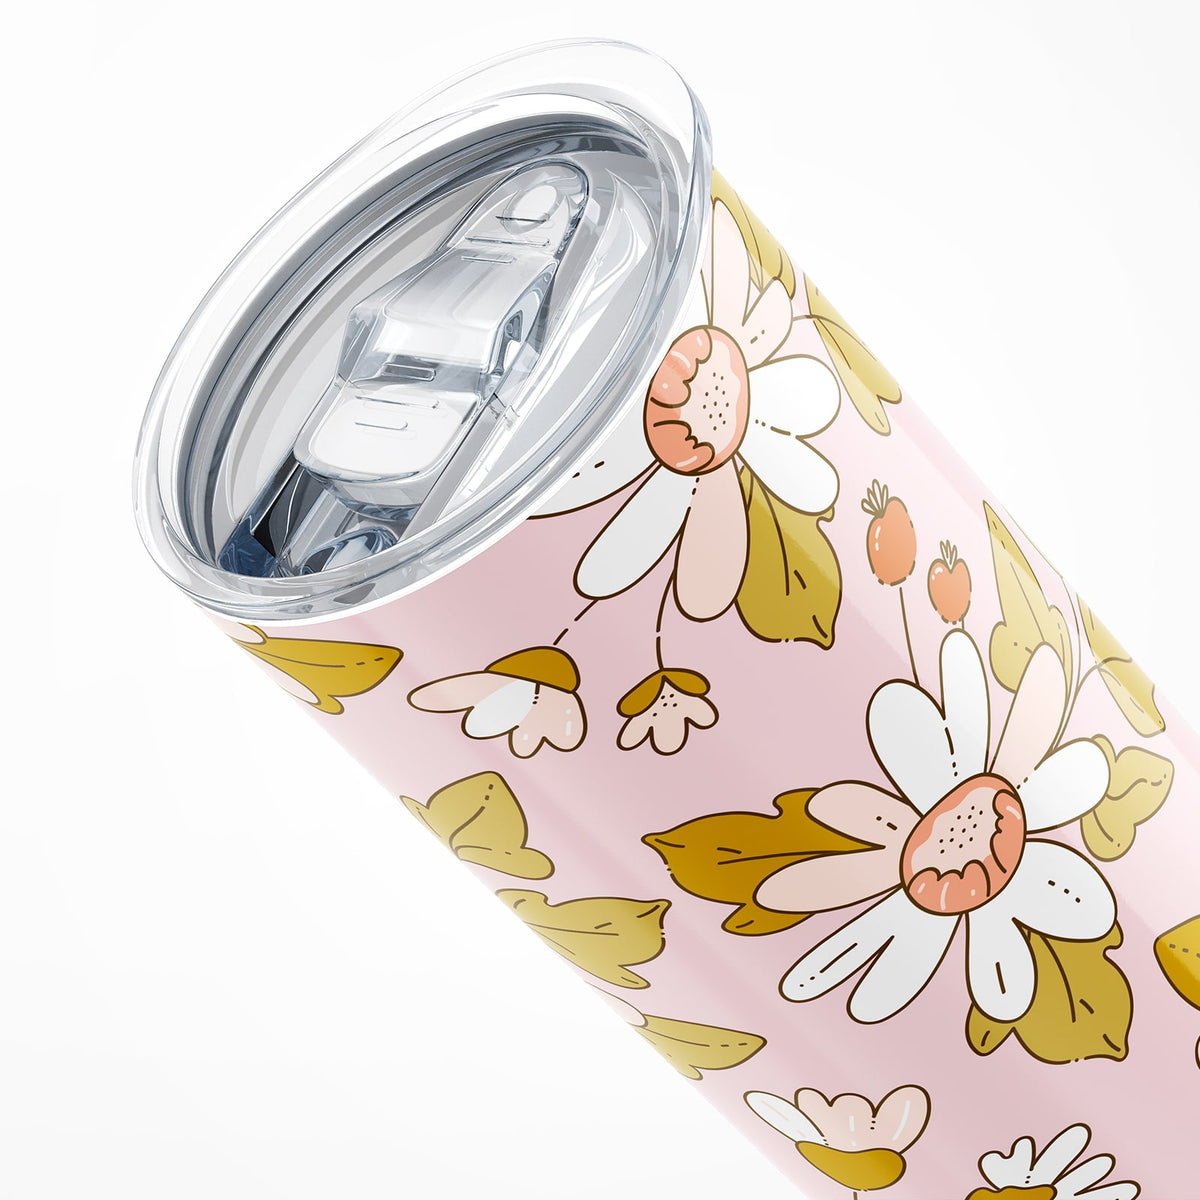 Floral Insulated 20oz Tumbler